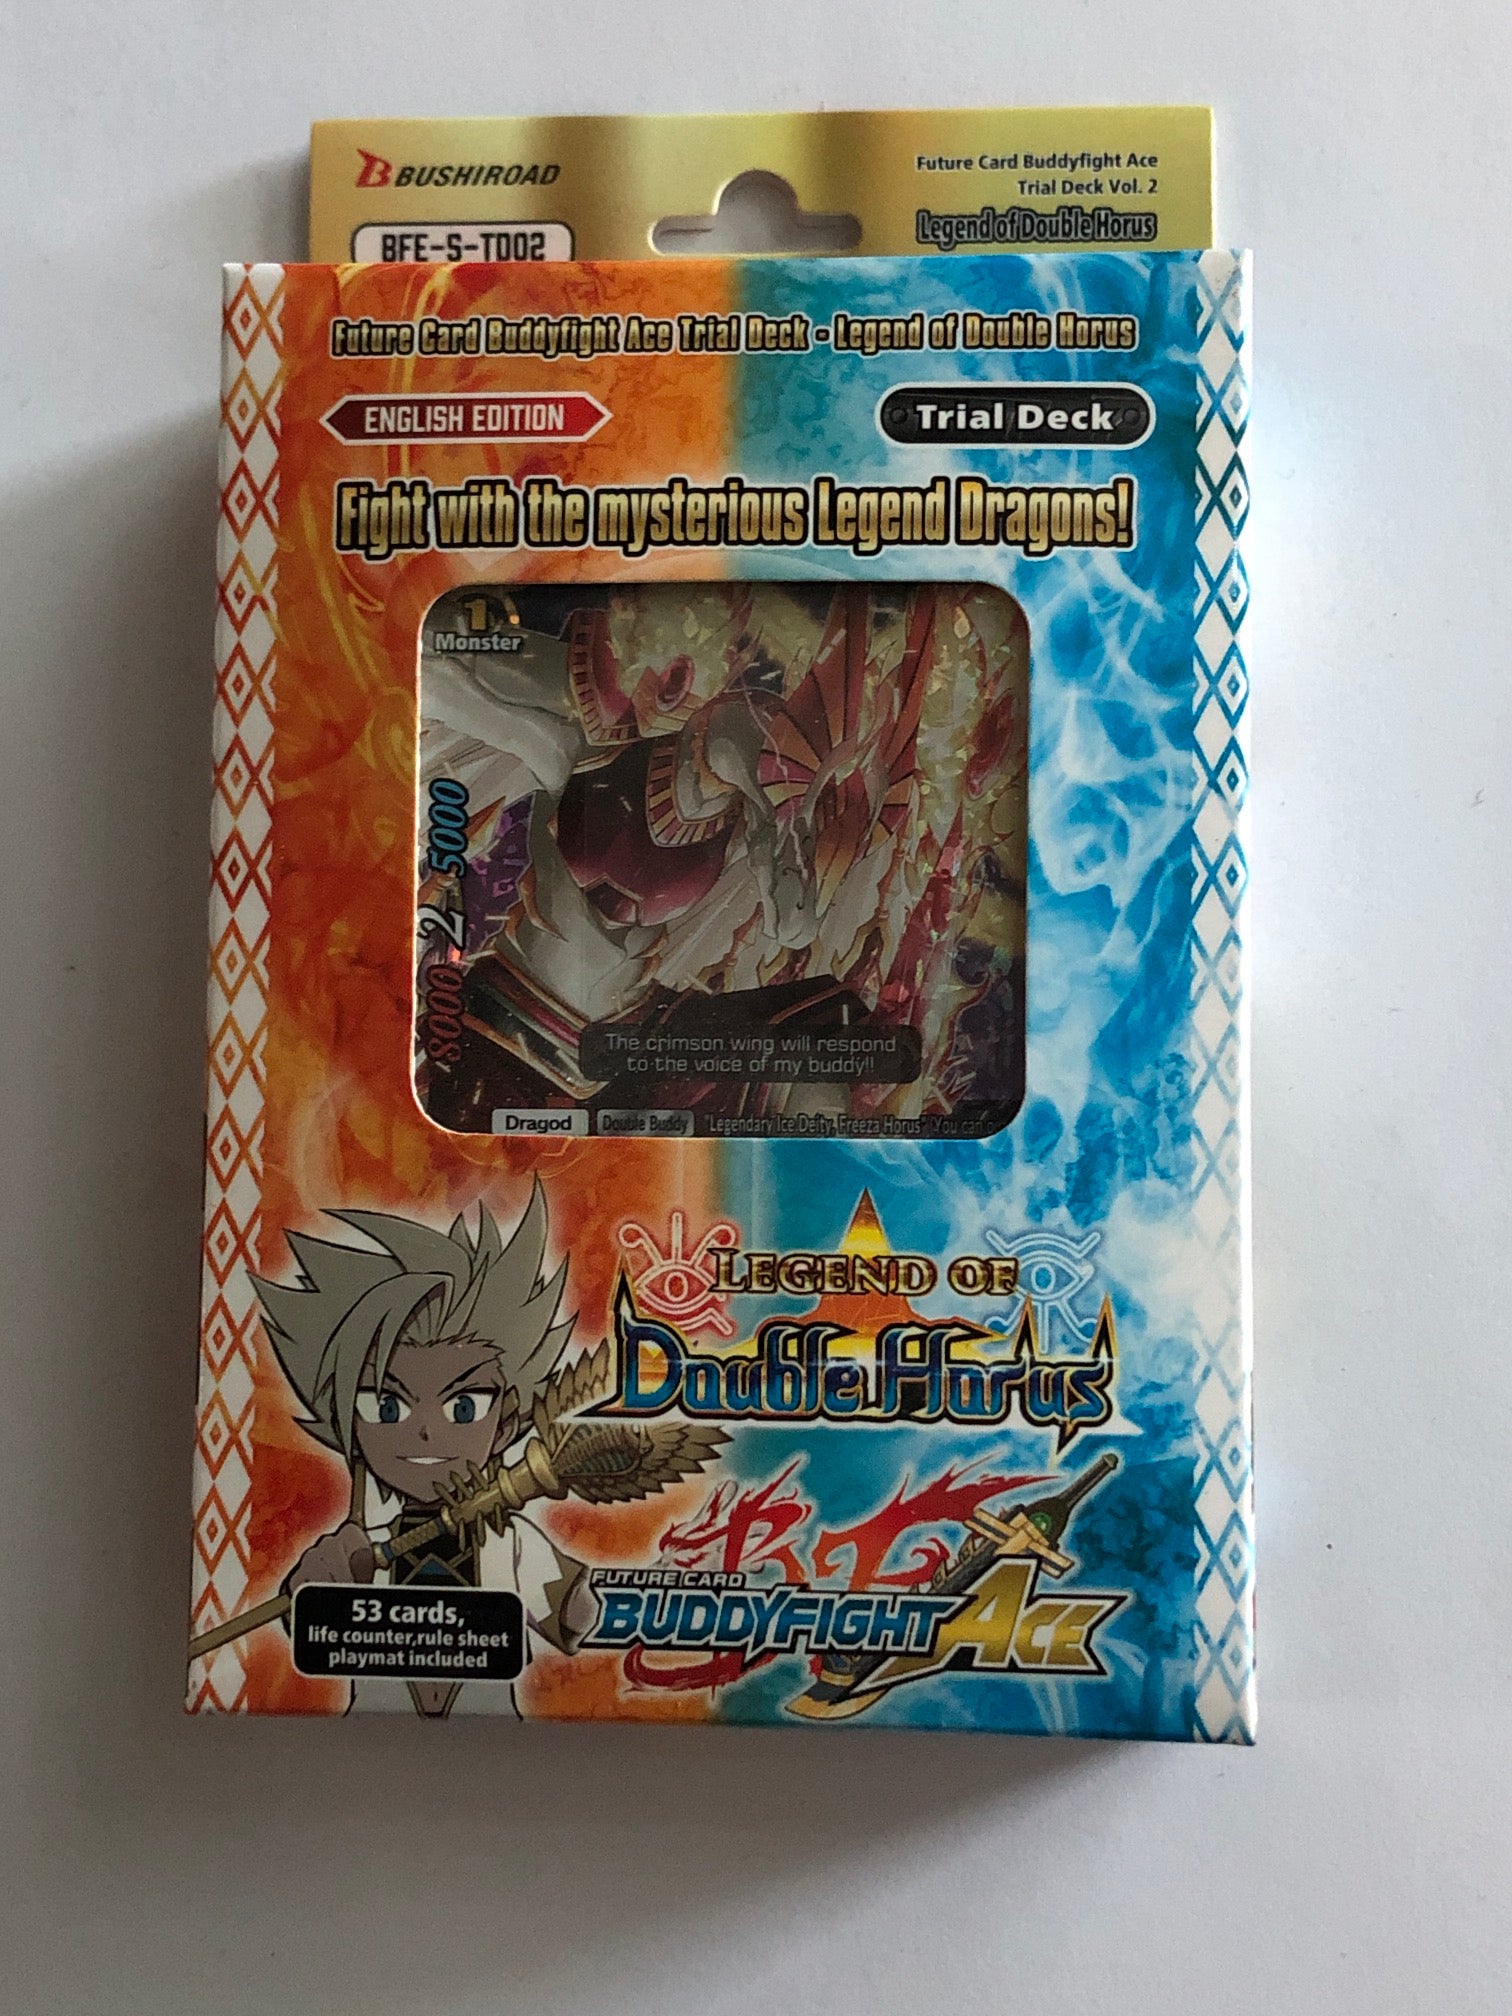 Future Card Buddyfight Ace Trial Deck - Legend of Double Horus - BFE-S-TD02 - English